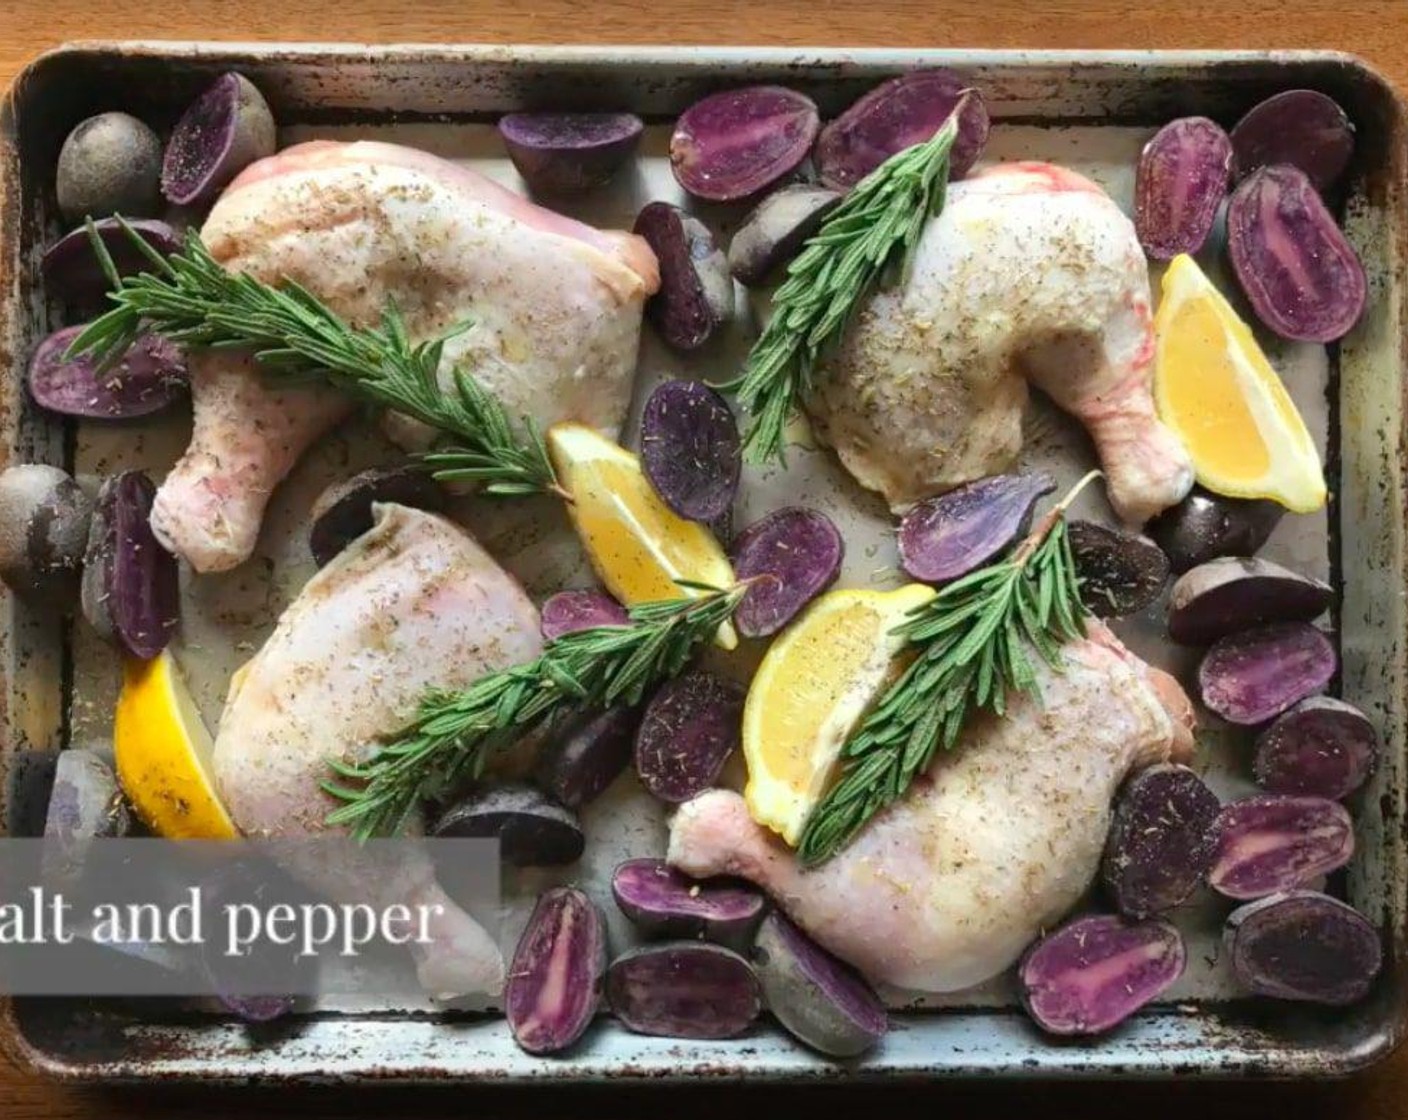 step 2 Add Bone-In Chicken Legs (4), Lemon (1), Fresh Rosemary (4 sprigs), Garlic (3 cloves), and Baby Potatoes (2 lb) to a sheet pan or baking dish. Drizzle with Olive Oil (as needed), Salt (to taste), and Ground Black Pepper (to taste). Toss to coat. Make sure the chicken is well seasoned on both sides.